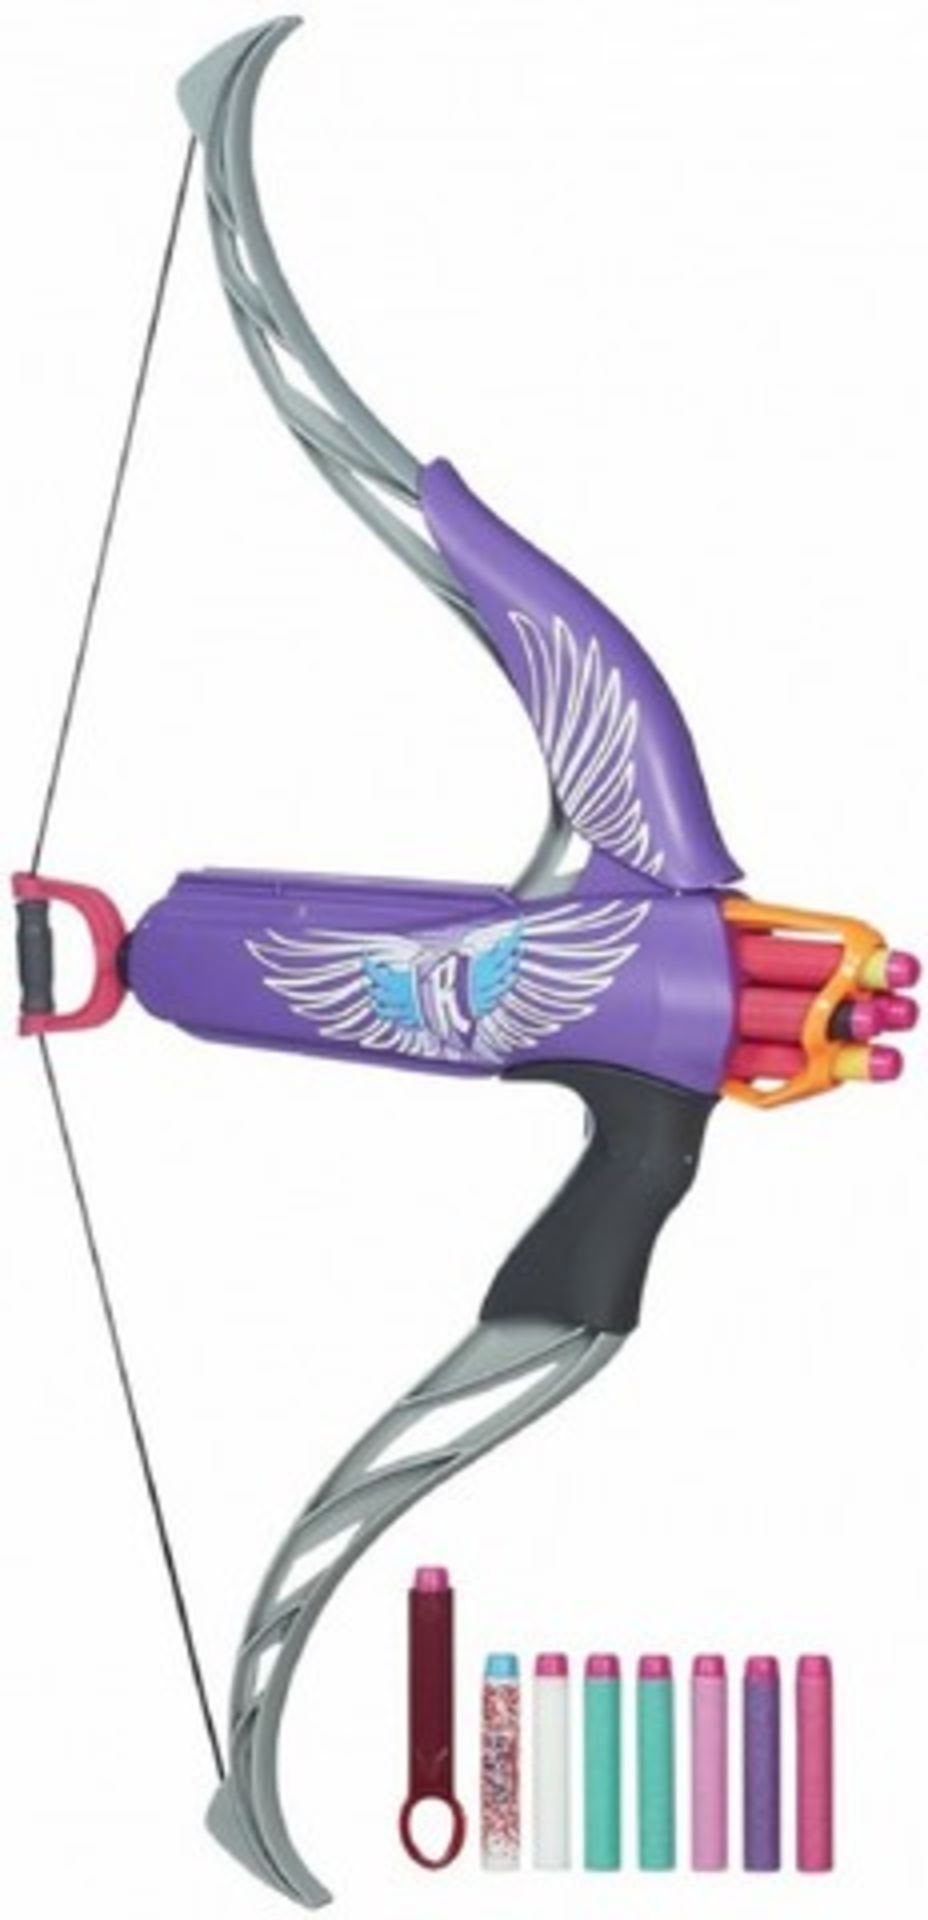 V Brand New Hasbro Nerf Rebelle Secrets And Spies Strongheart Bow With Bonus Pack (8 Extra Darts)